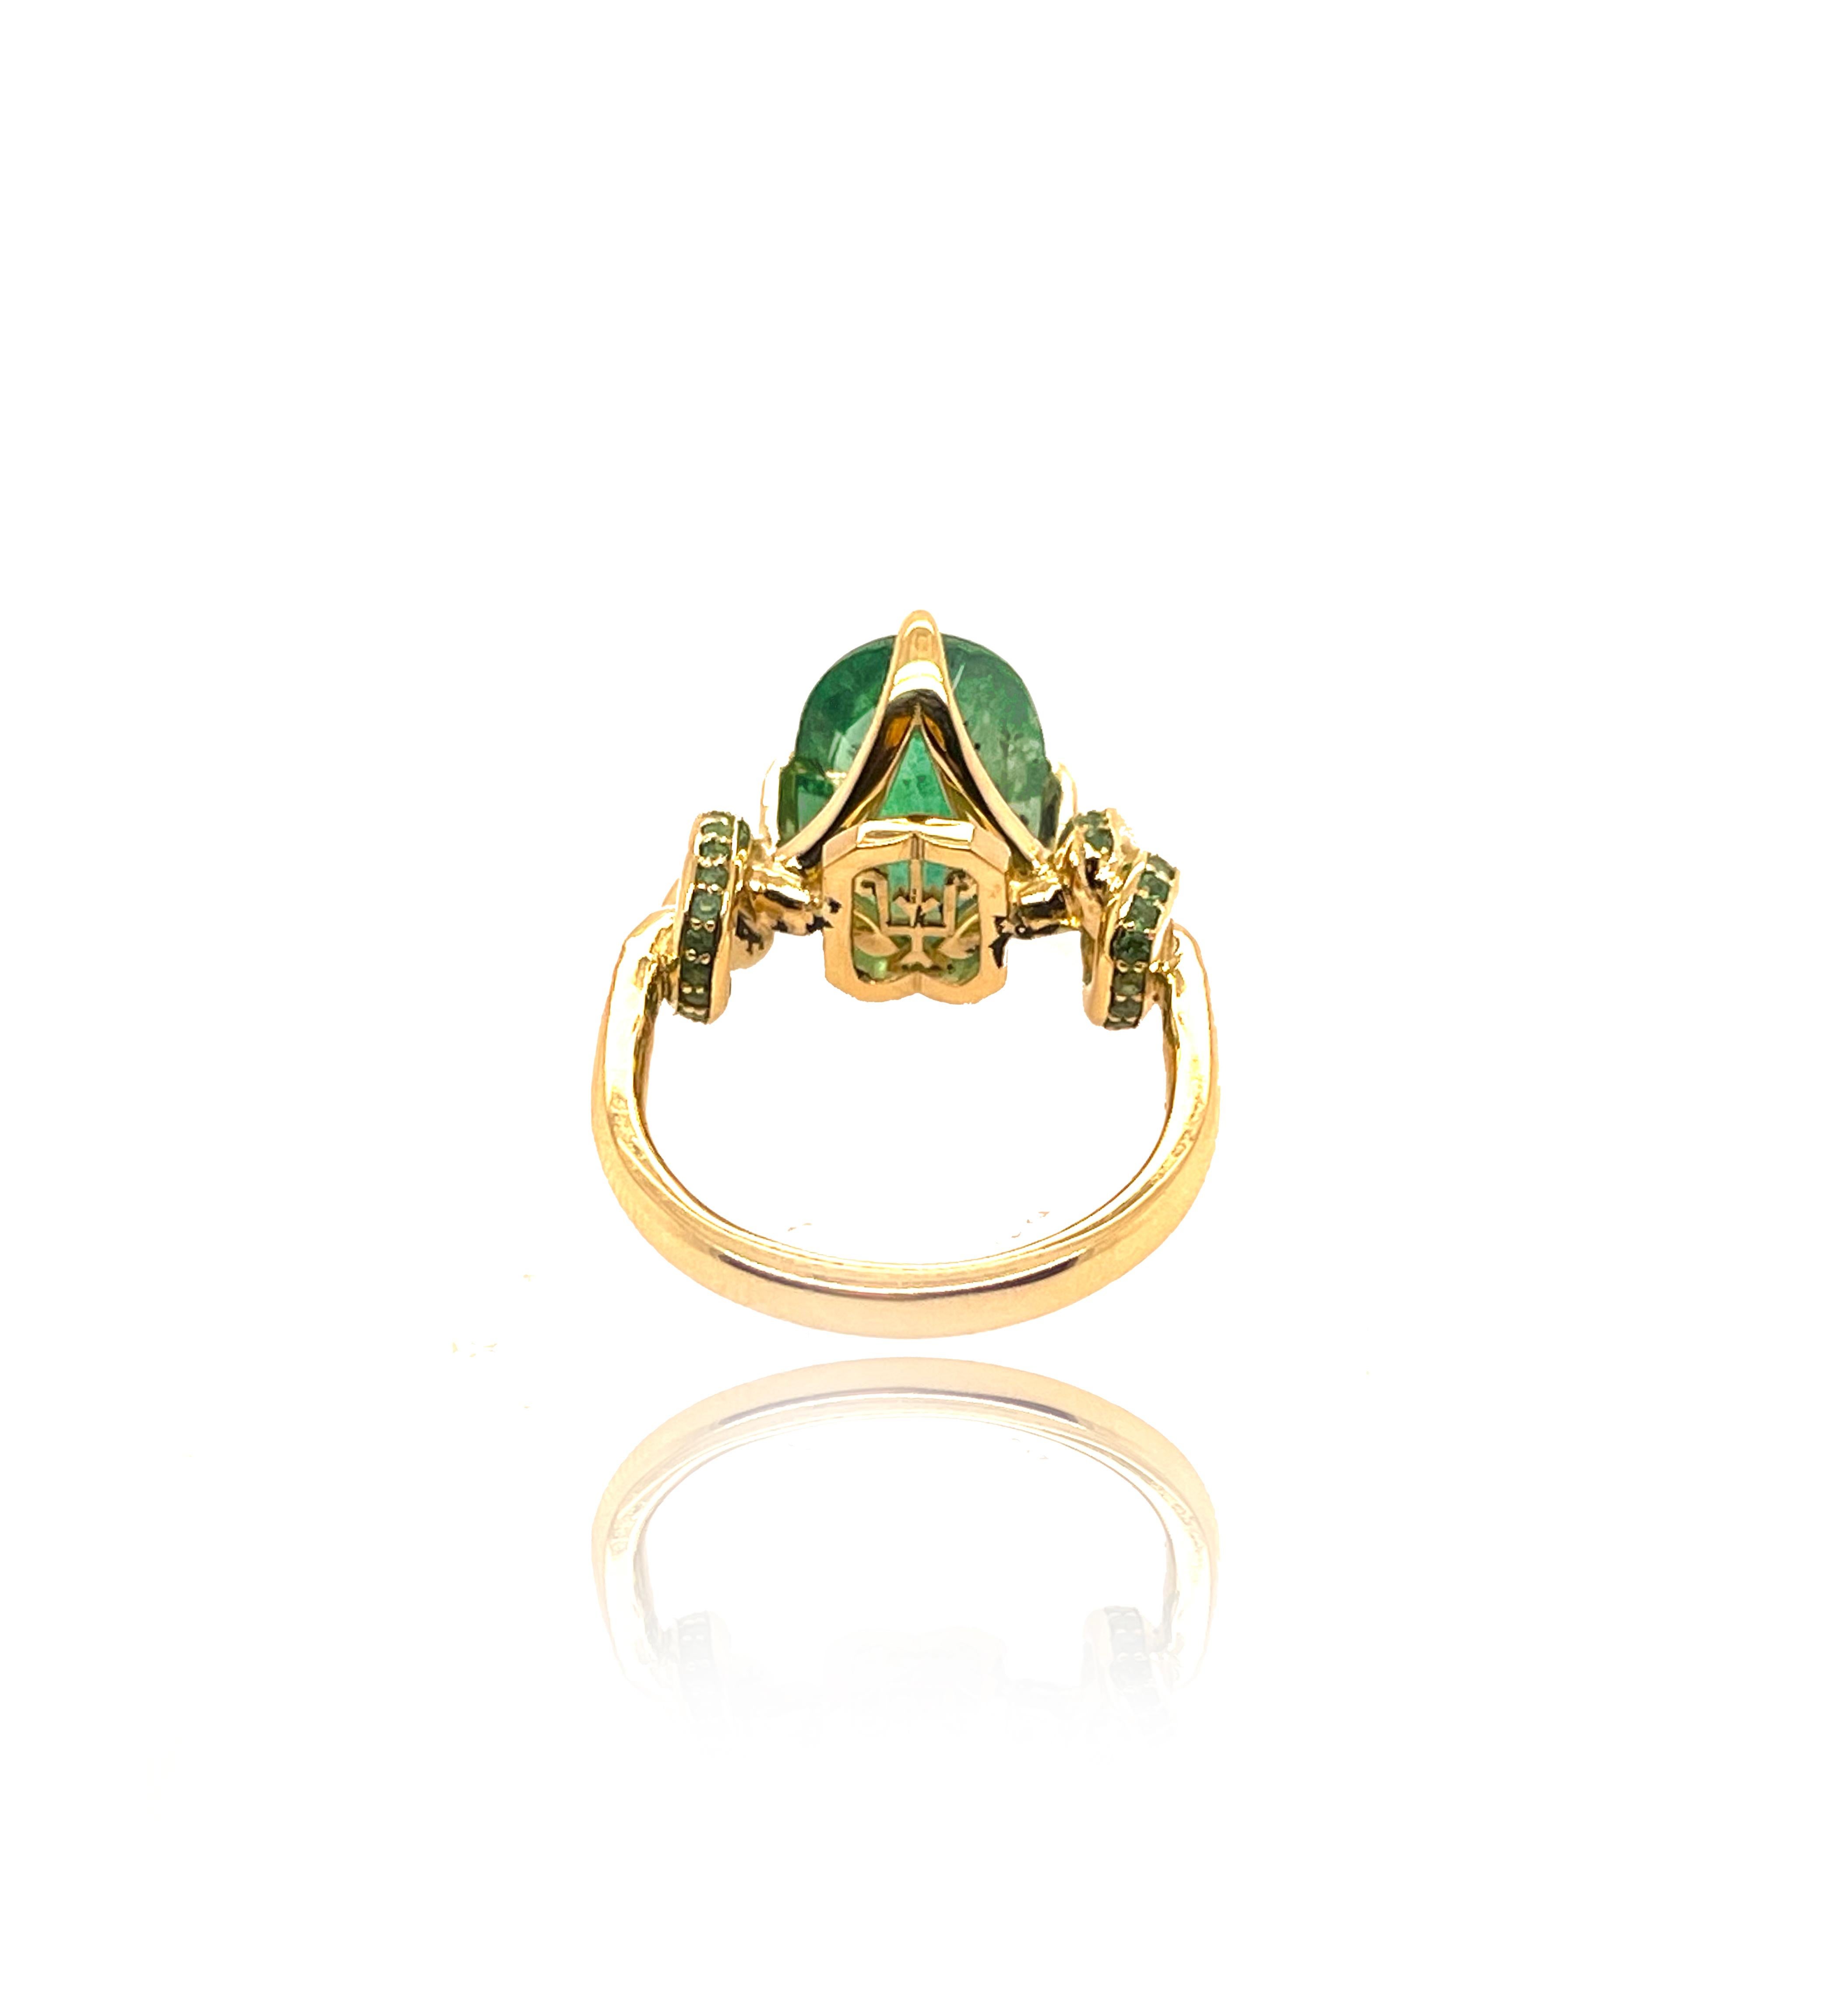 Emerald Cut 4.01ct Emerald Oval Cut Forget Me Knot Ring in 18Carat Yellow Gold with Emeralds For Sale